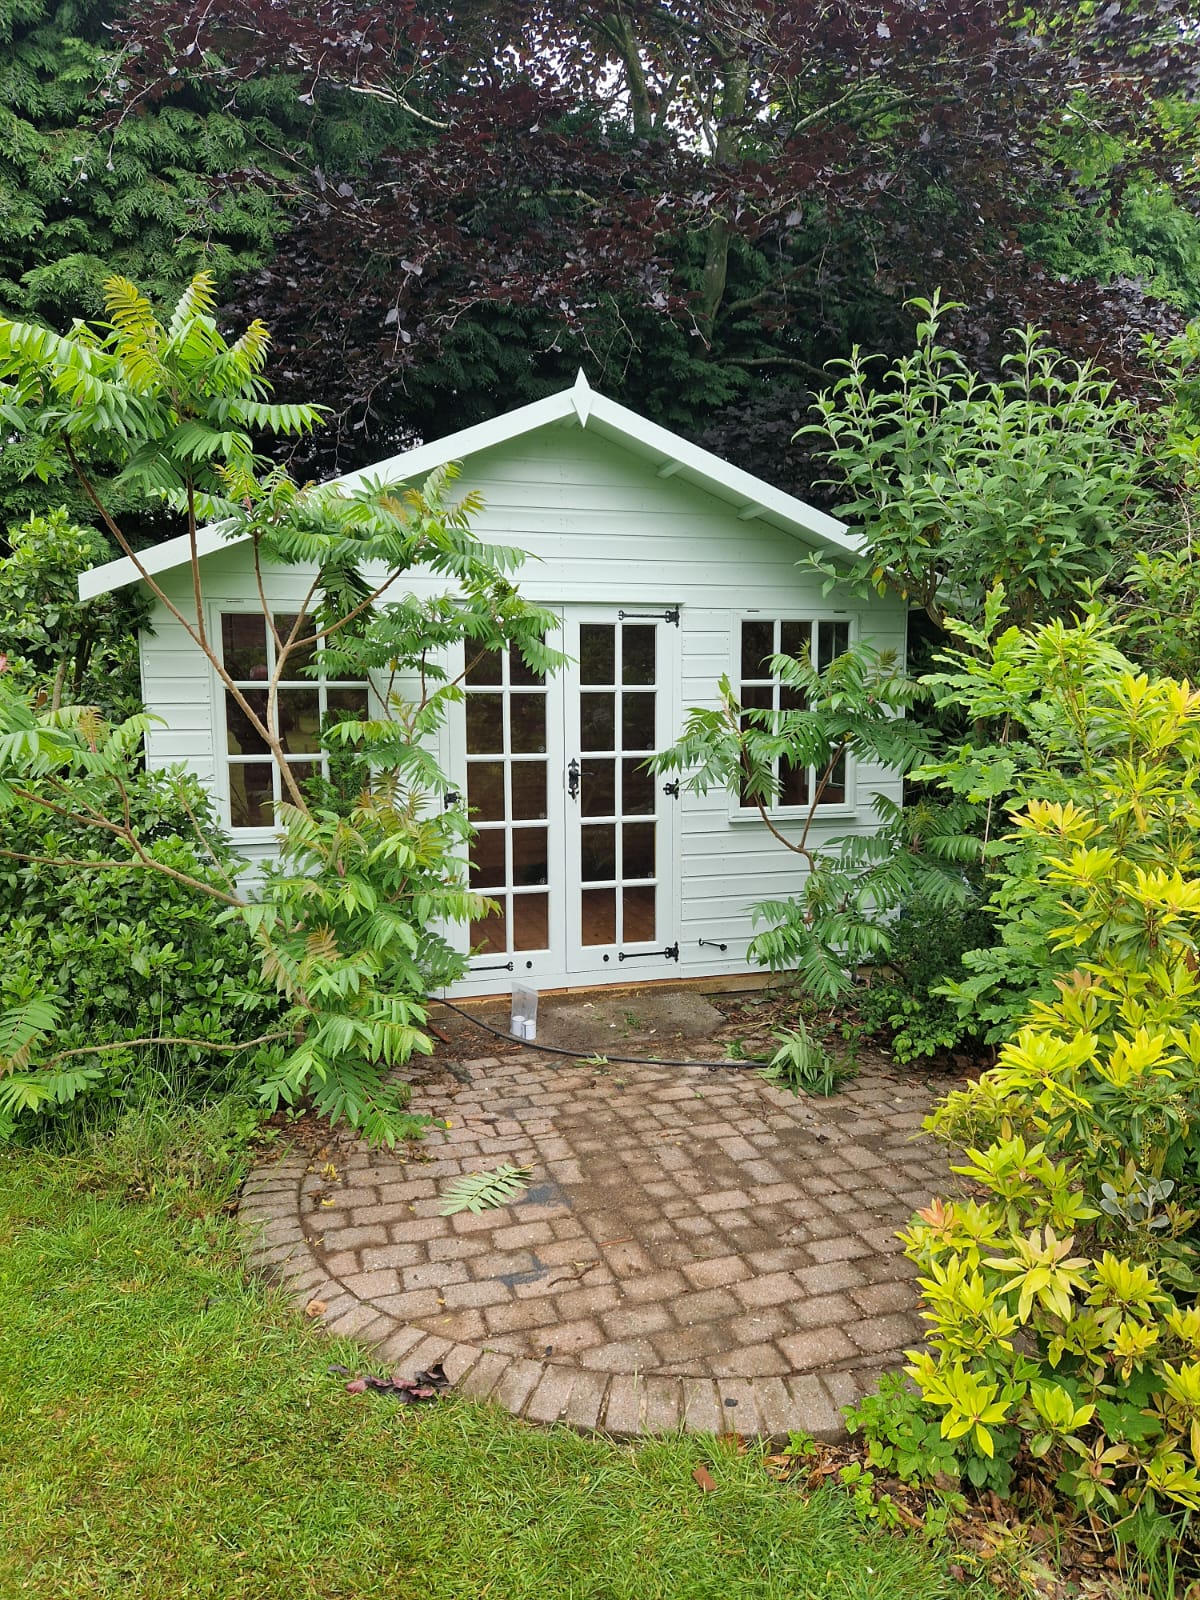 The Summerhouse Painted